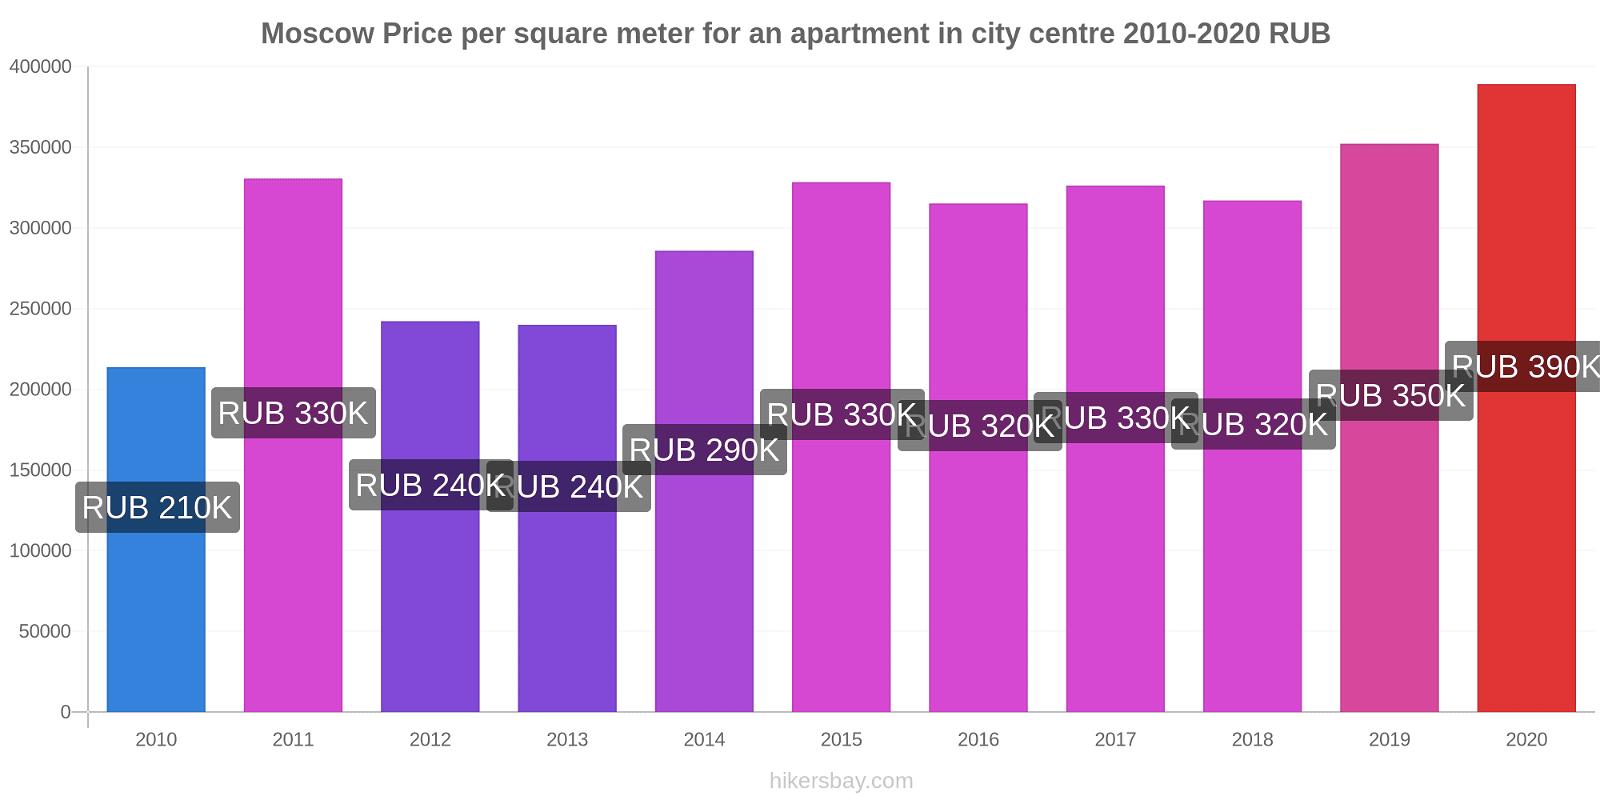 Moscow price changes Price per square meter for an apartment in city centre hikersbay.com